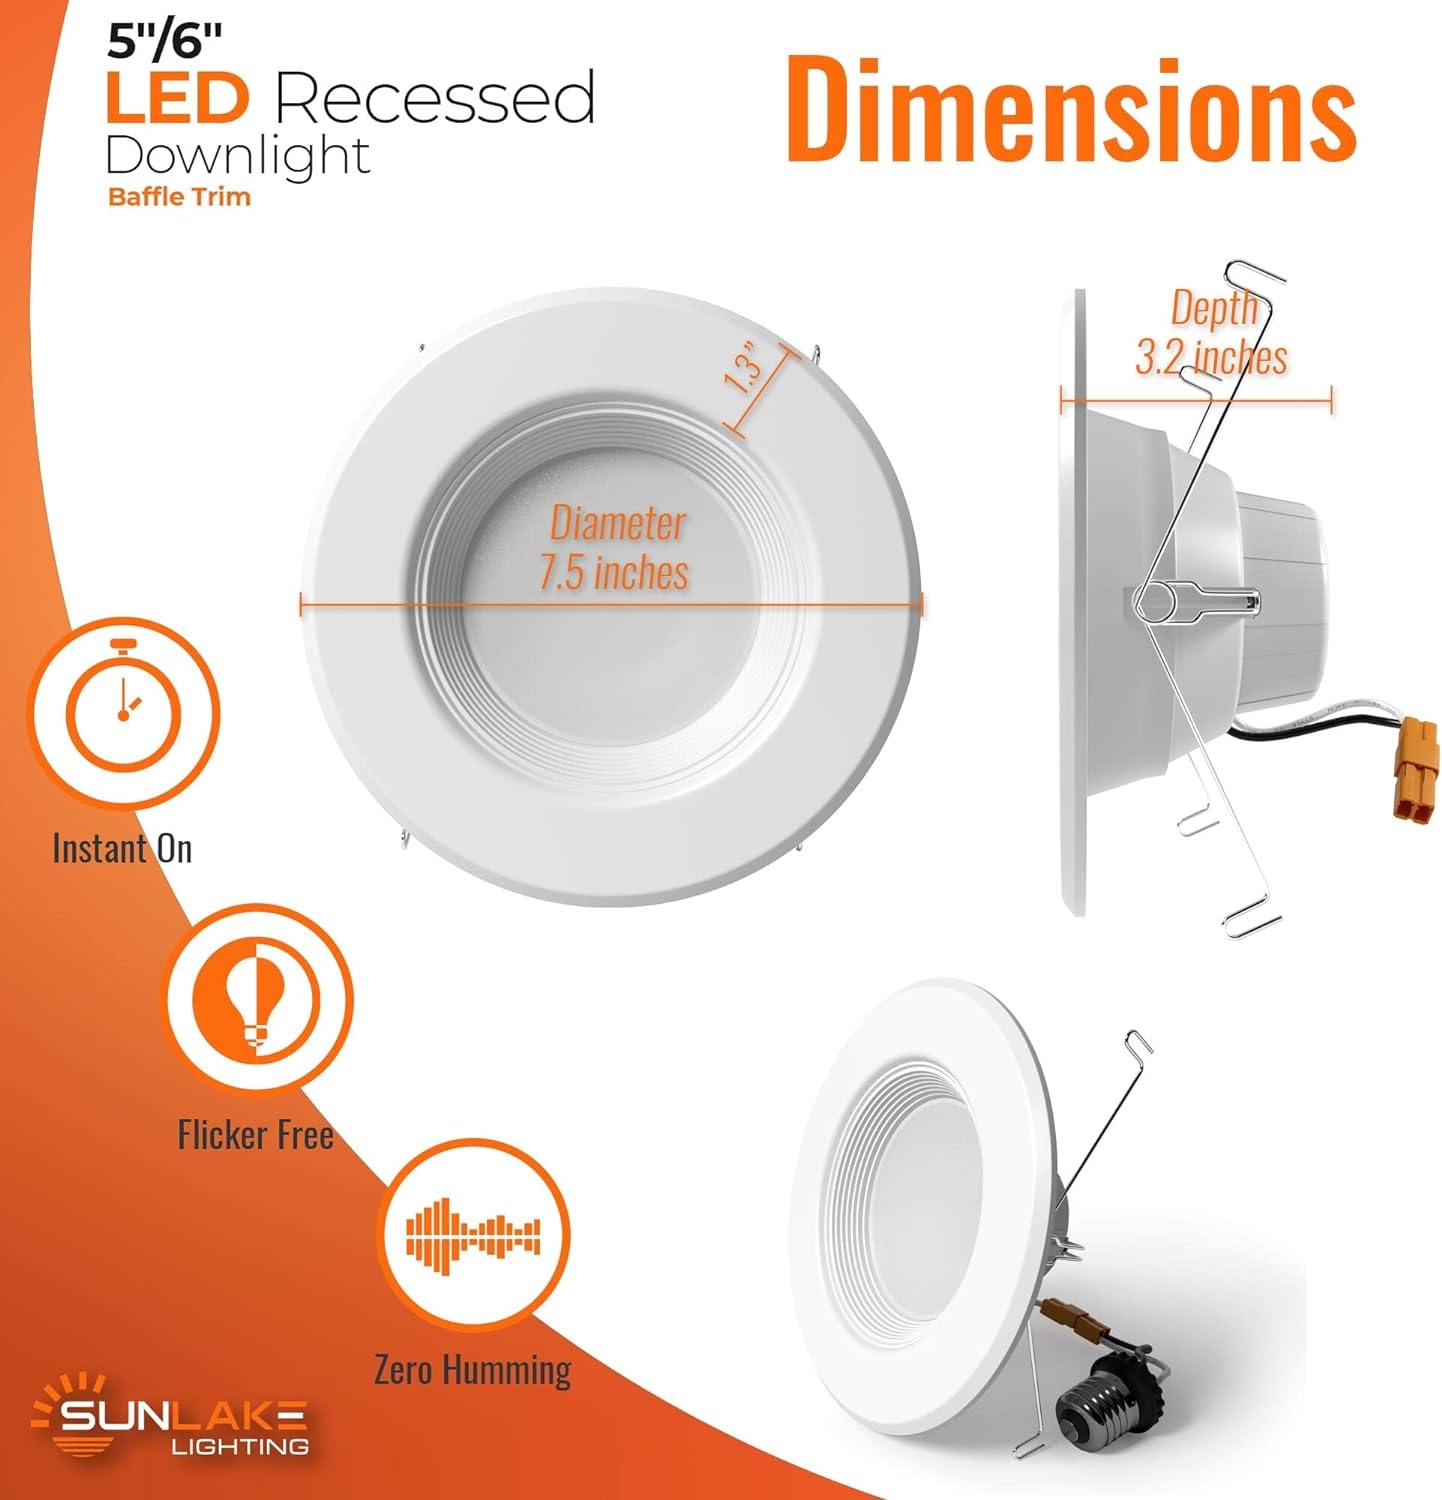 SunLake Lighting 12 Pack 5/6 Inch LED Recessed Downlight, Baffle Trim, Dimmable, 4000K Cool White, 12W=75W, 1080 LM, Wet Rated Waterproof, Retrofit Kit, UL + Energy Star